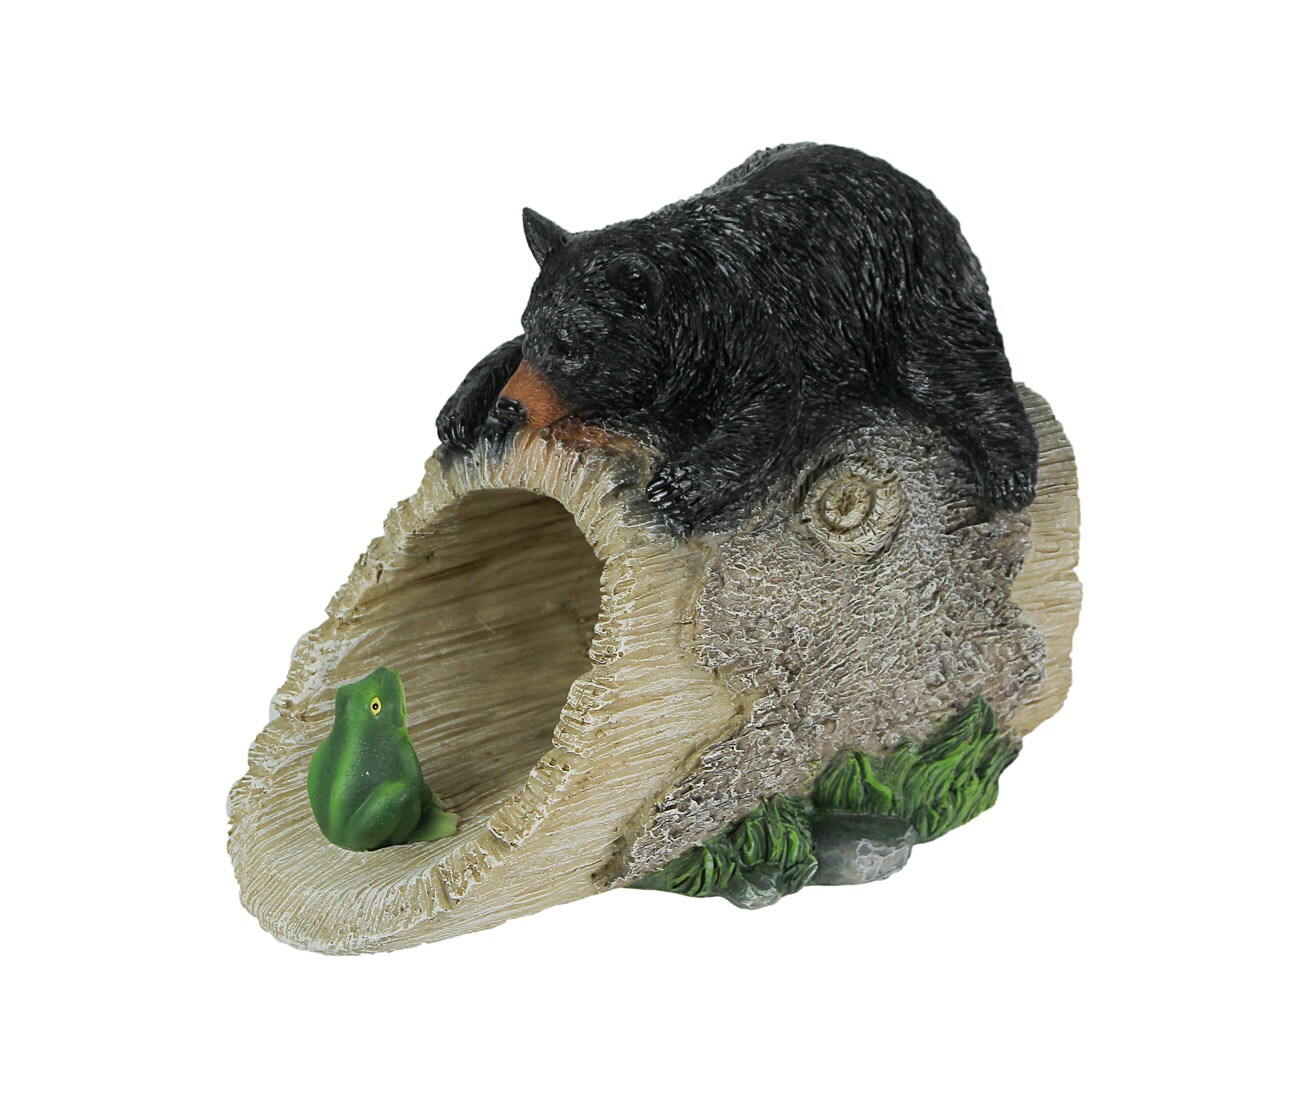 Playful Black Bear and Frog Decorative Gutter Downspout Extension